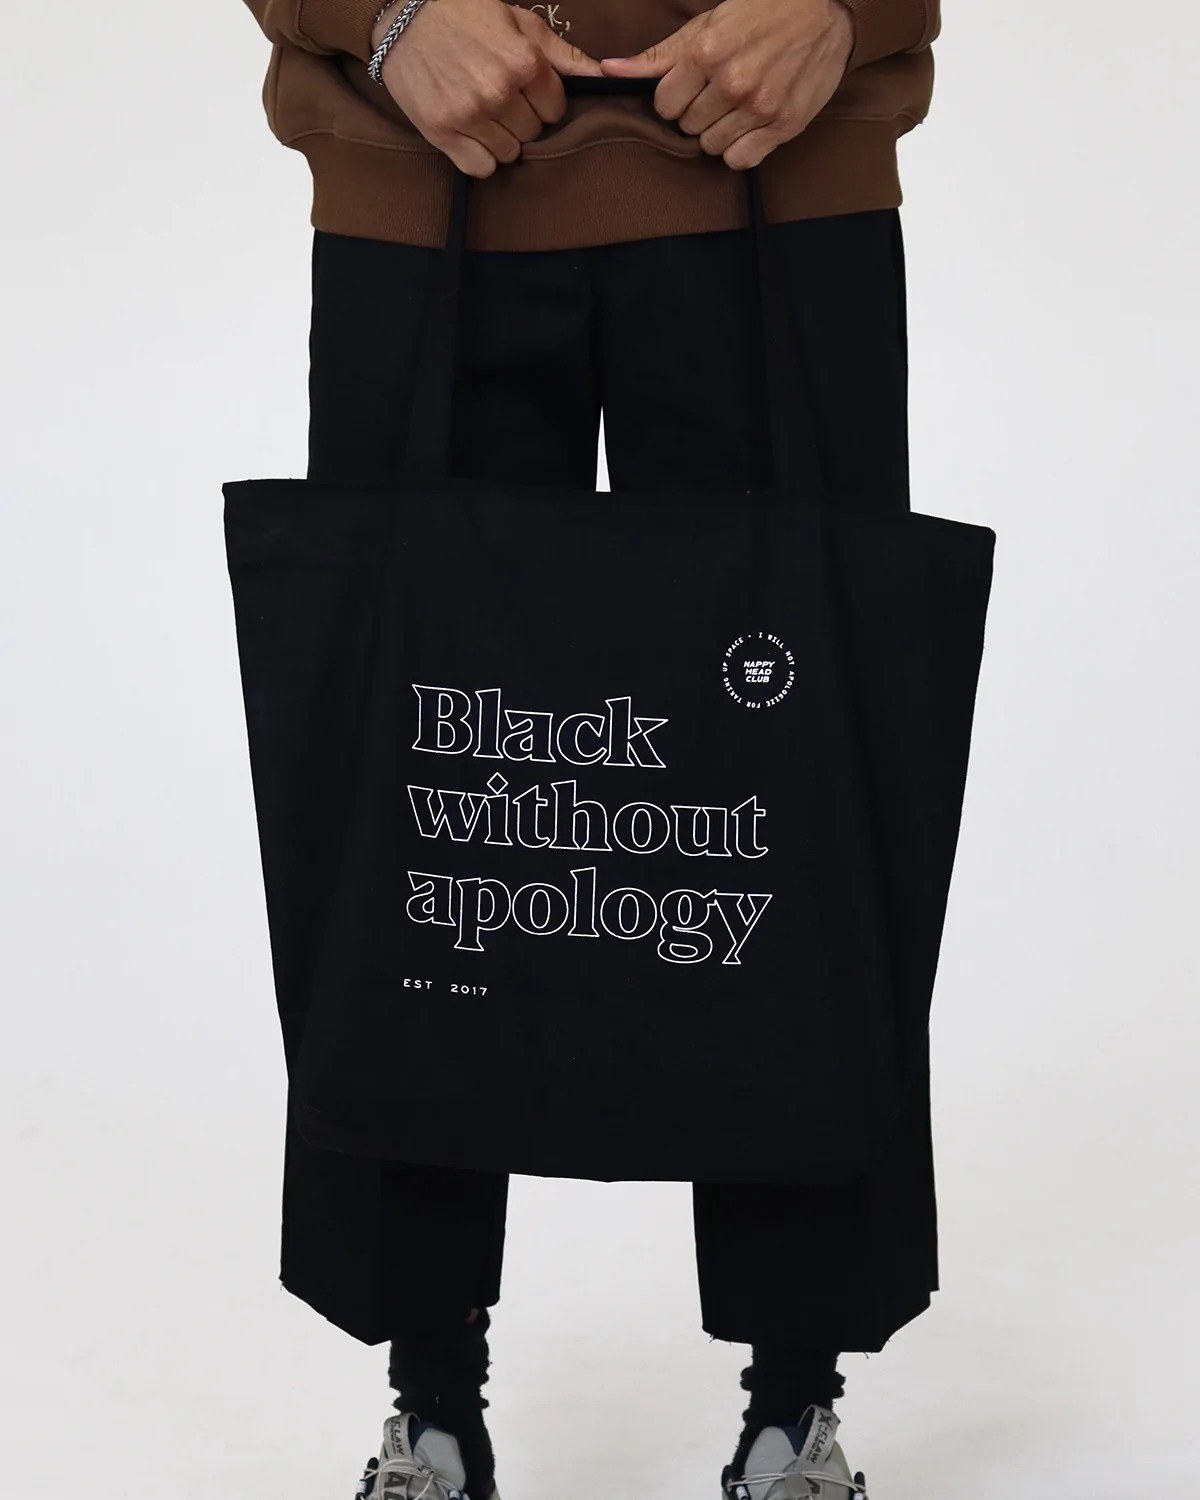 model holding black and white message tote